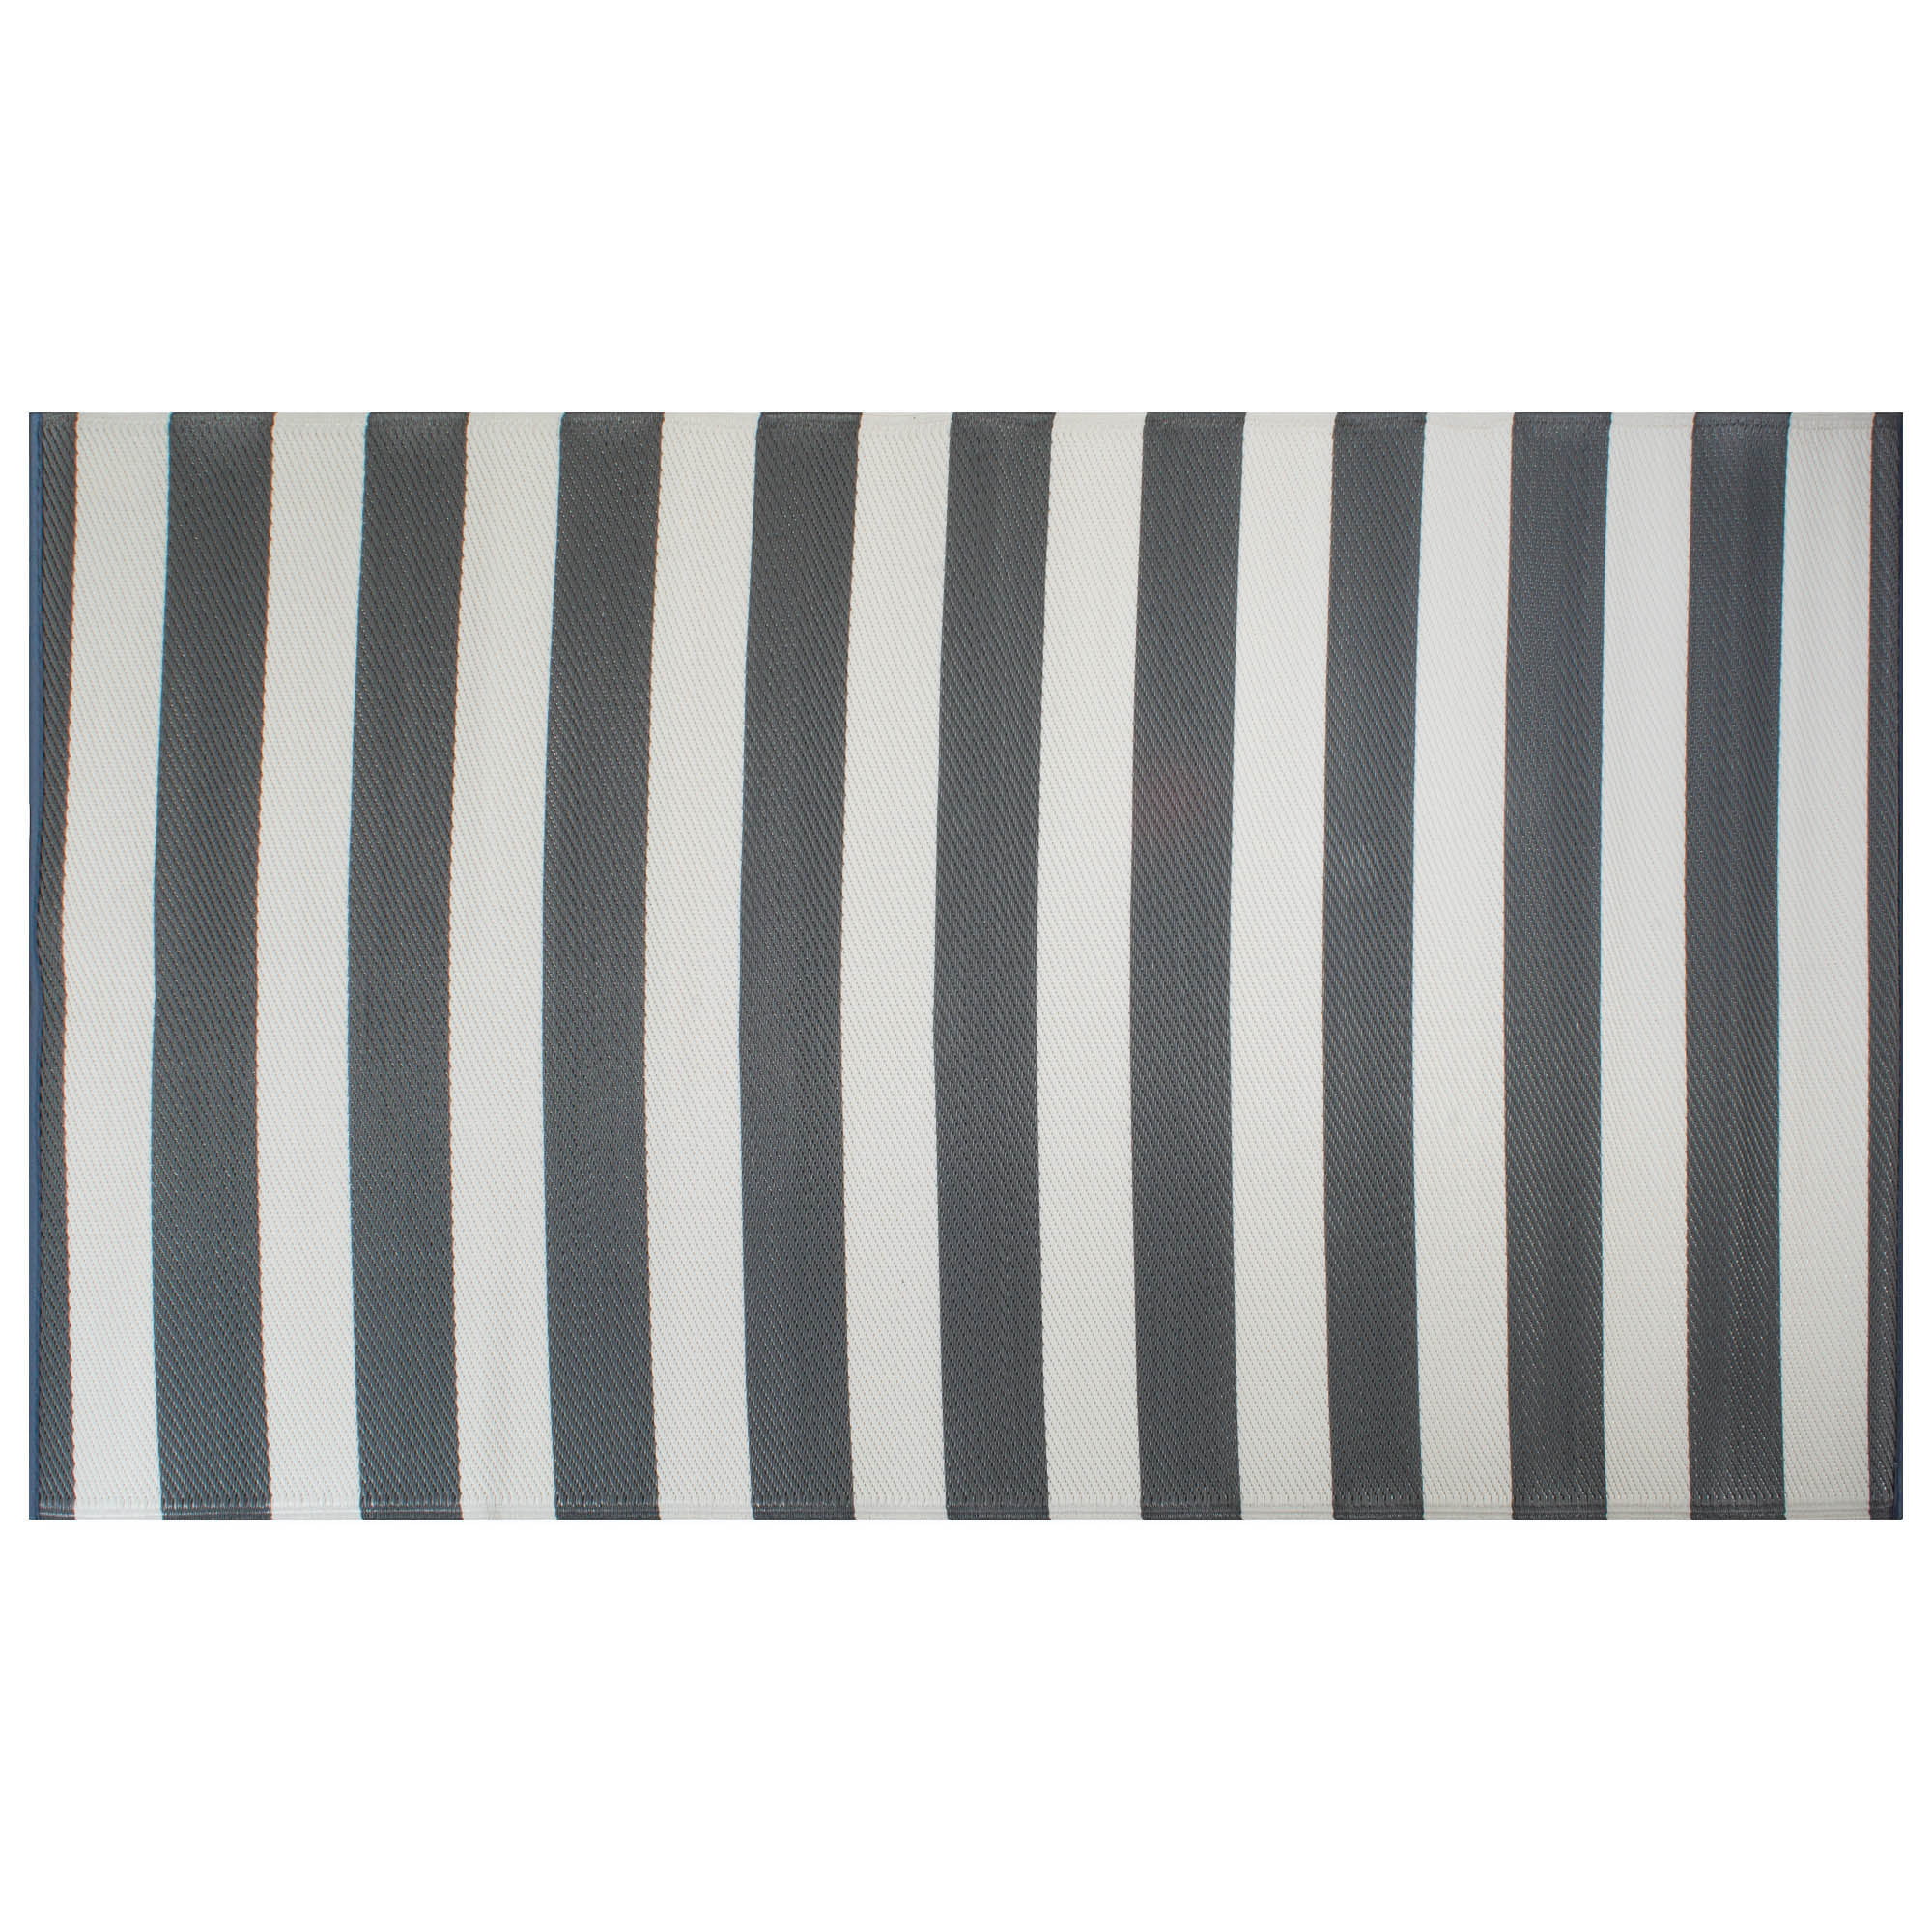 Gray White Stripe Outdoor Rug, Grey And White Striped Rug